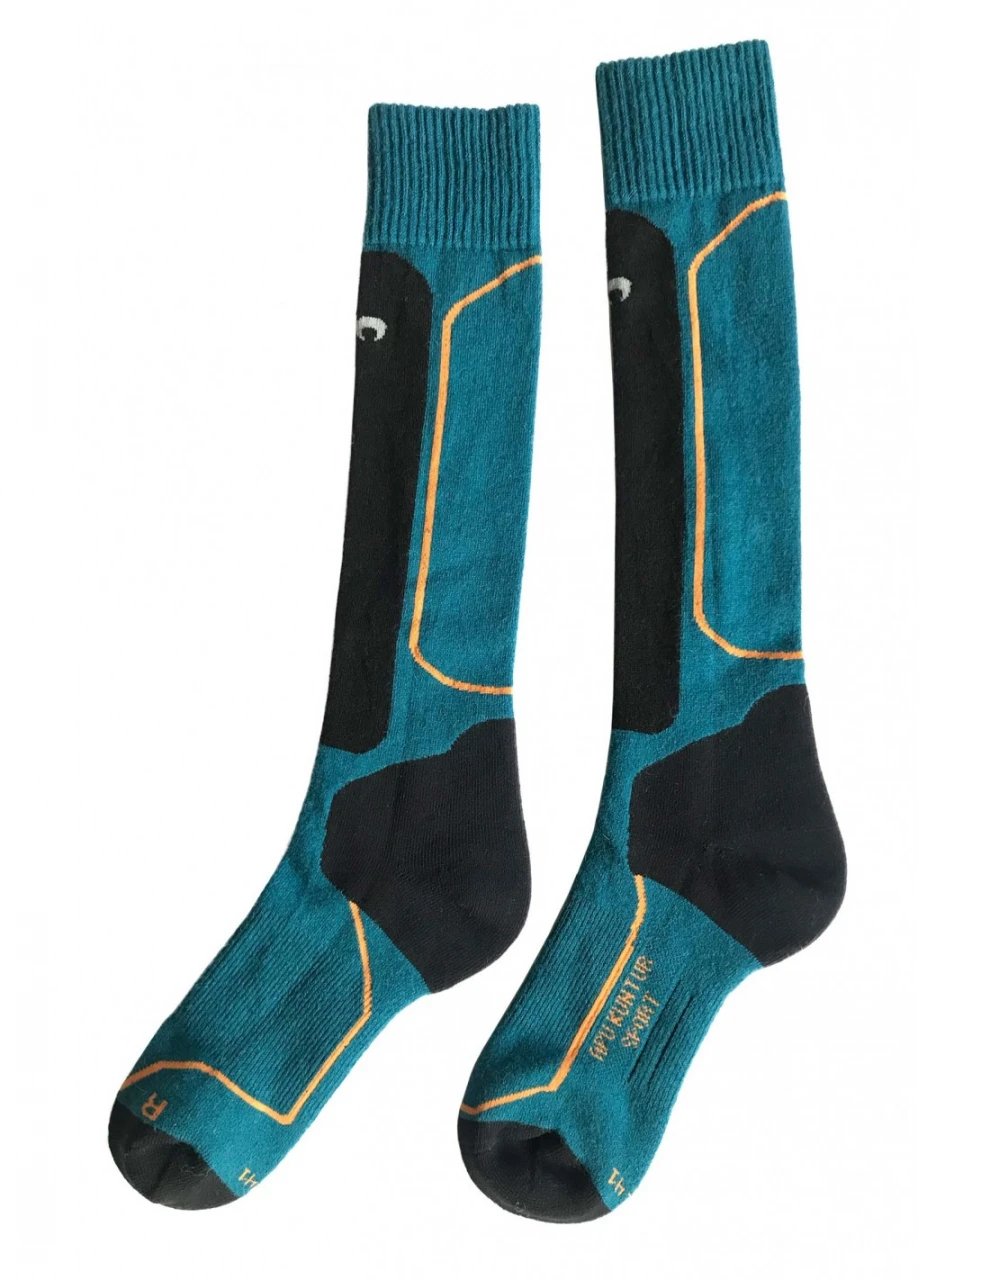 PREMIUM Sport and Horse Racing socks for women and men in Alpaca and Pima Cotton blend